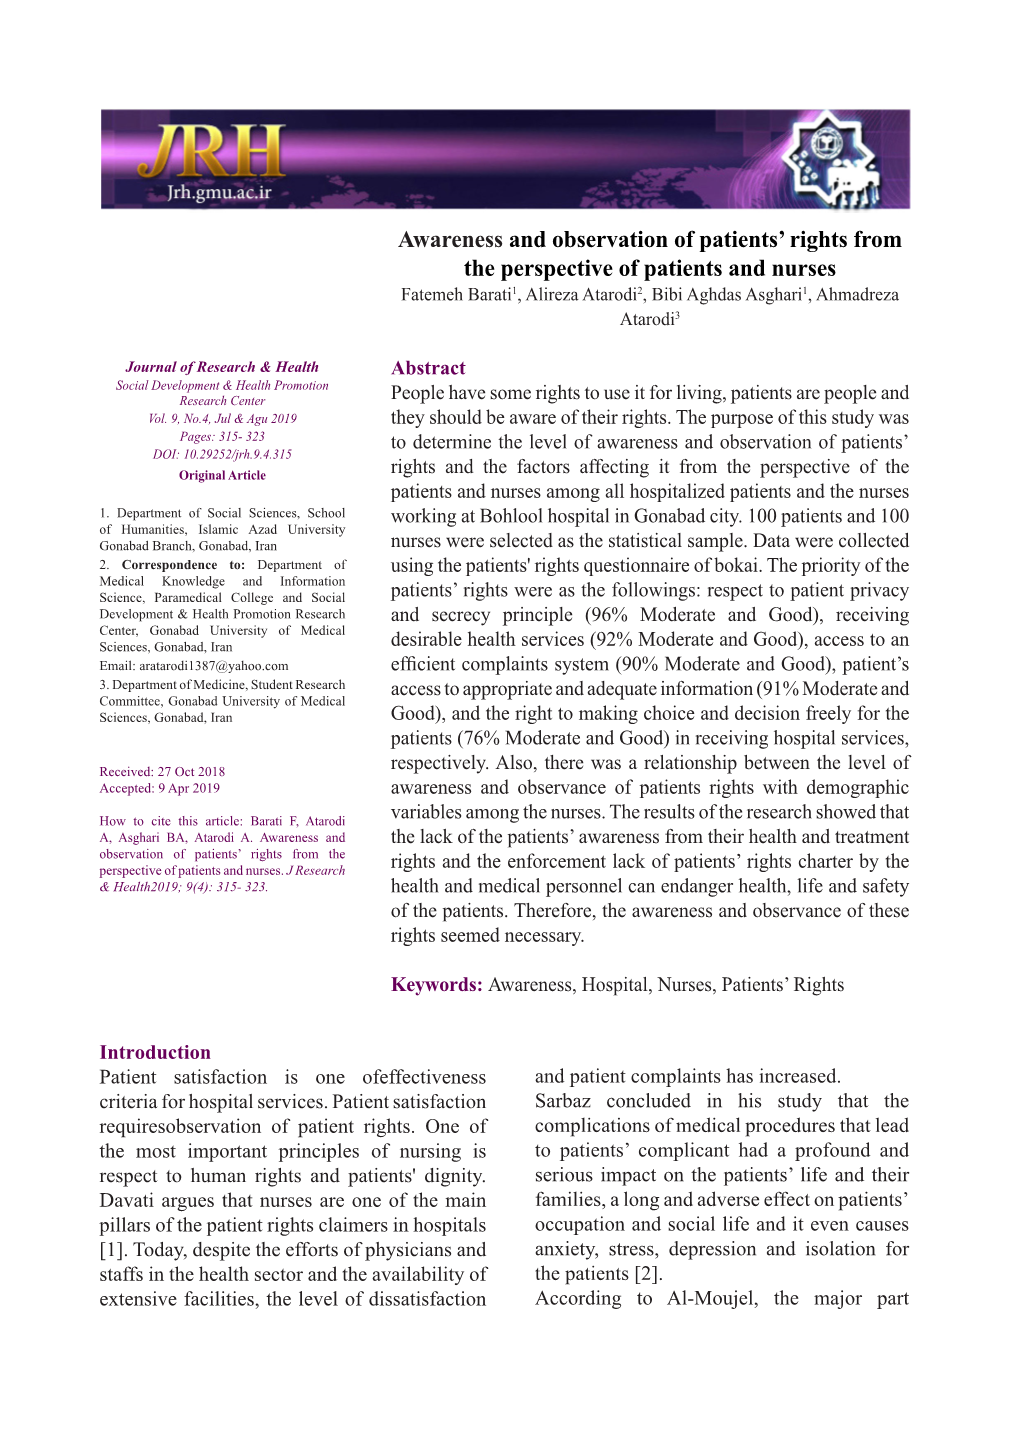 Awareness and Observation of Patients' Rights from the Perspective of Patients and Nurses